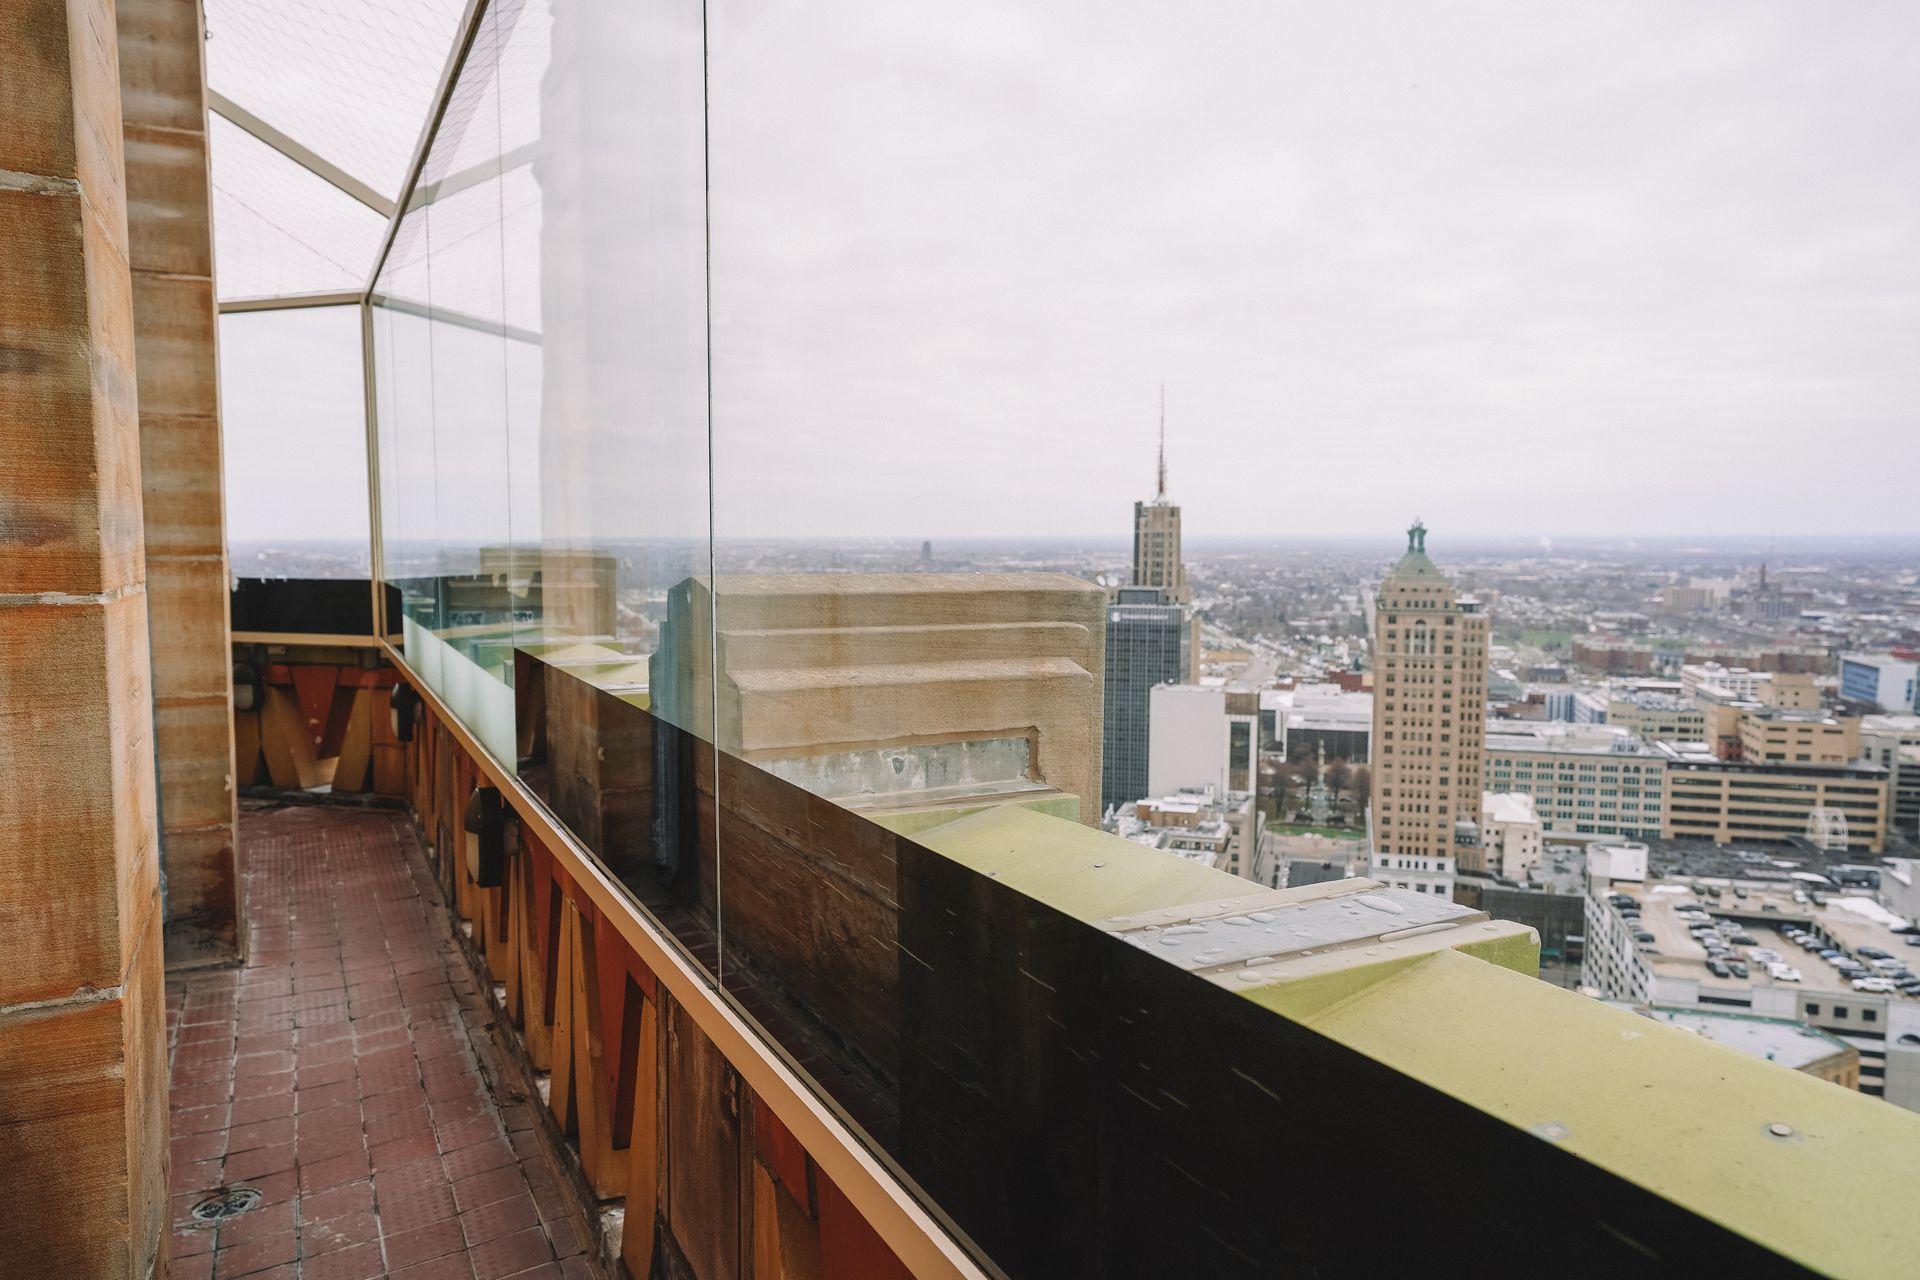 A view from the observation deck of the City Hall Observation Tower in Buffalo. A sheet of glass is between the viewing deck and the open air.